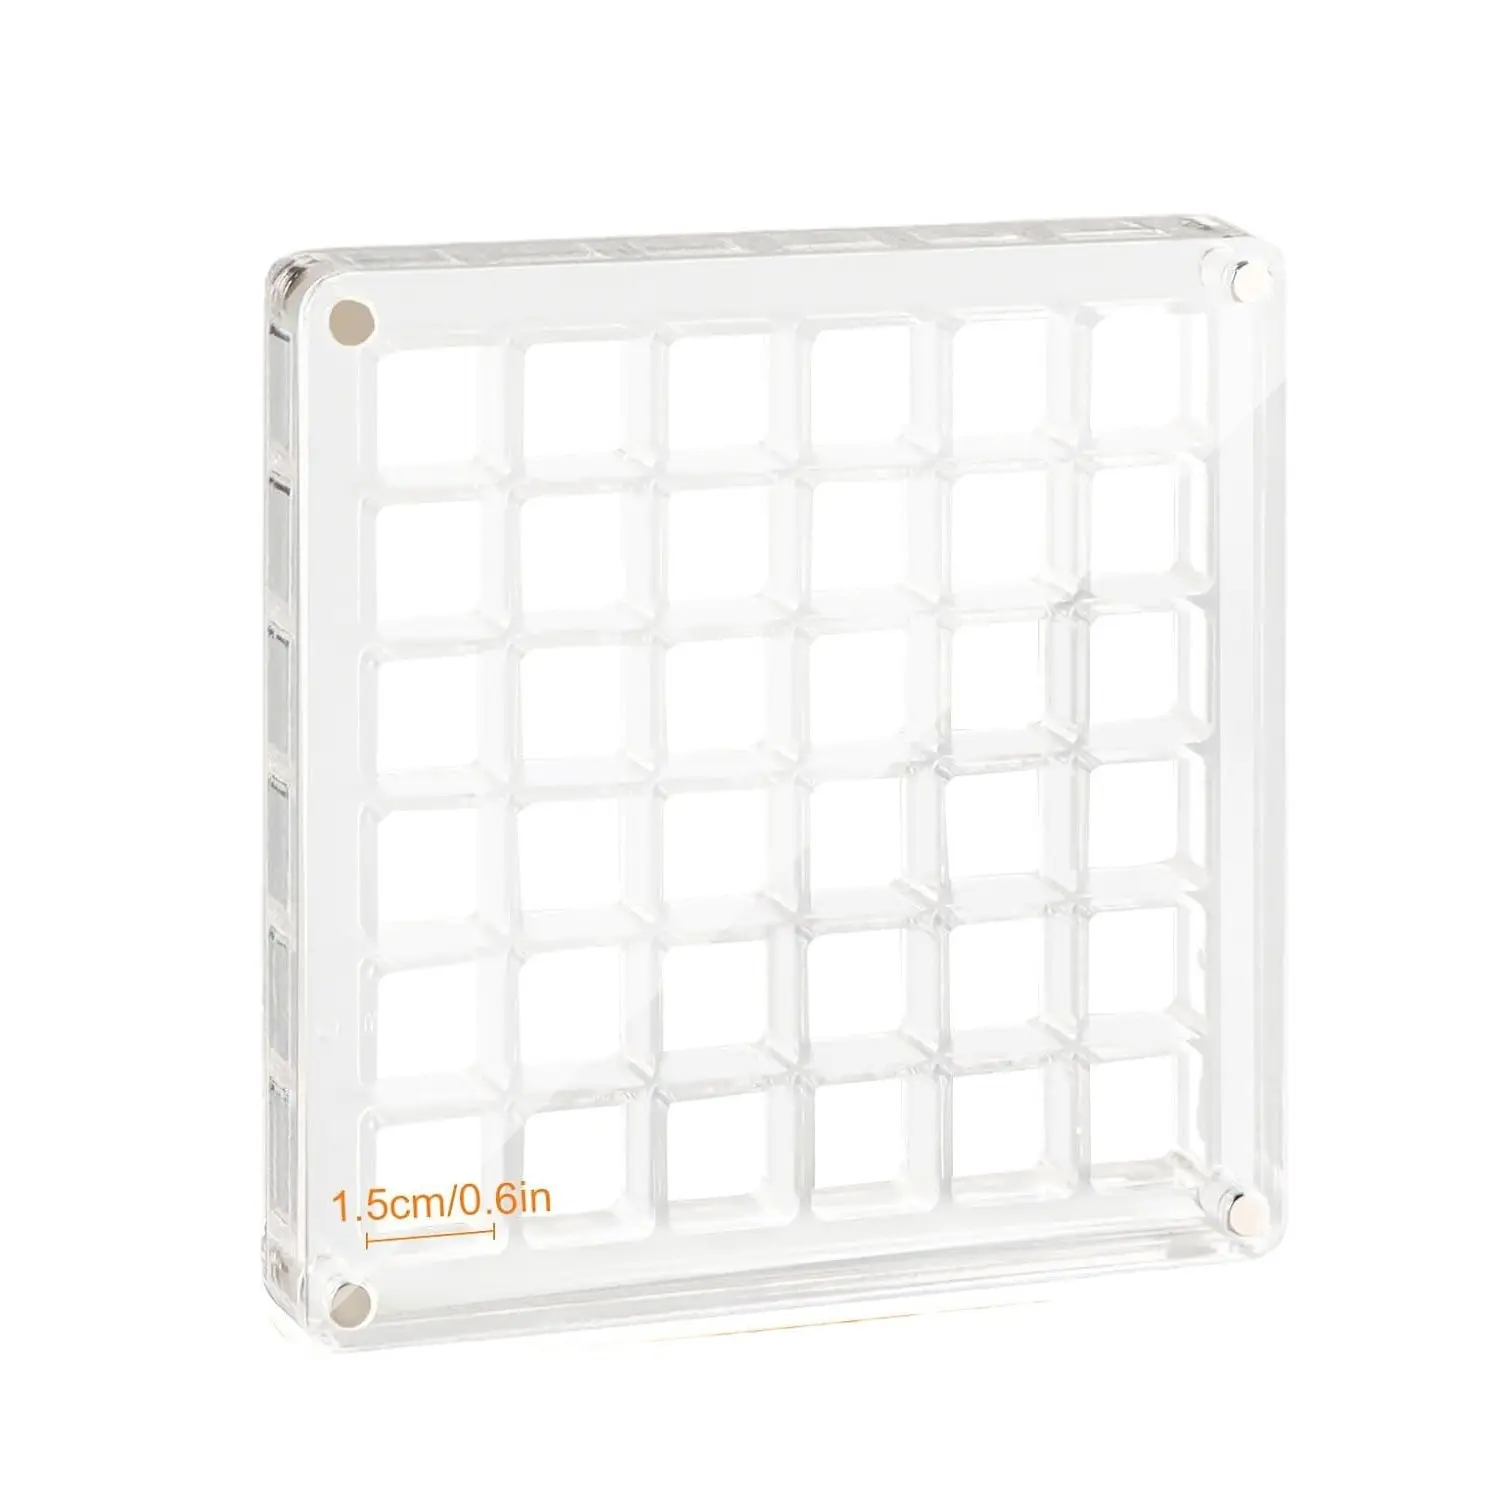 Transparent Acrylic Jewelry Storage Box Seashell Display Box Cabinet Showcase Acrylic Magnetic Seashell Display Case for Gifts